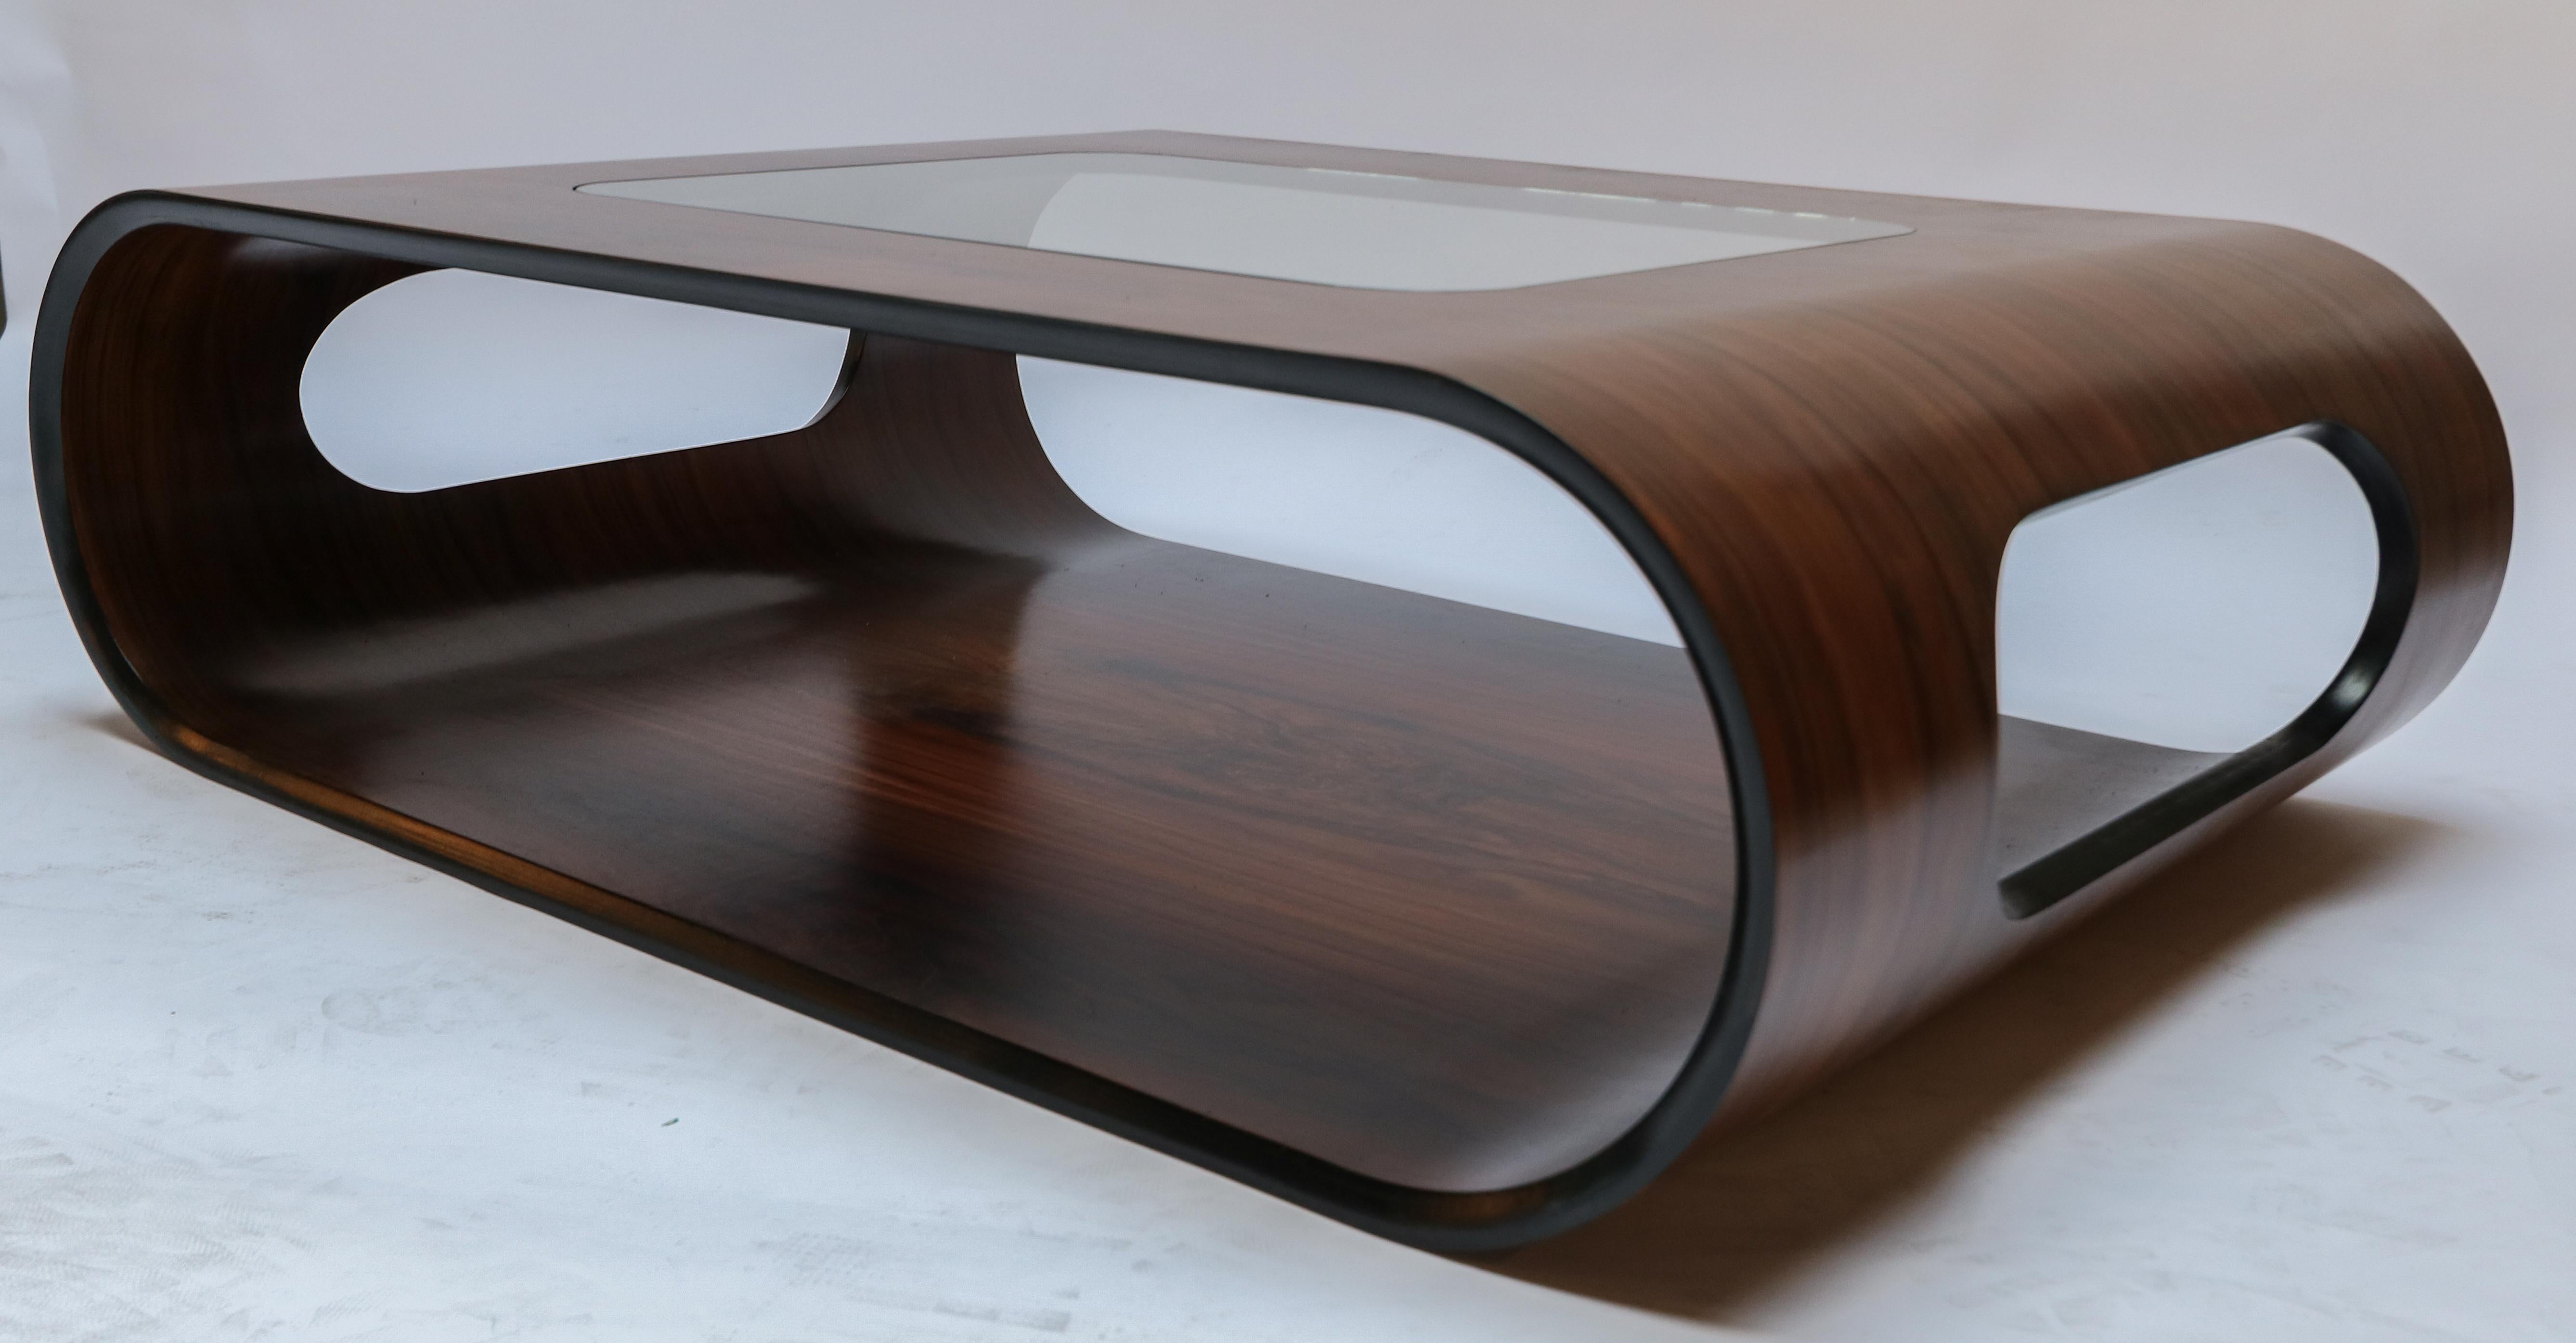 American Custom Midcentury Style Rosewood Coffee Table with Glass Top by Adesso Imports